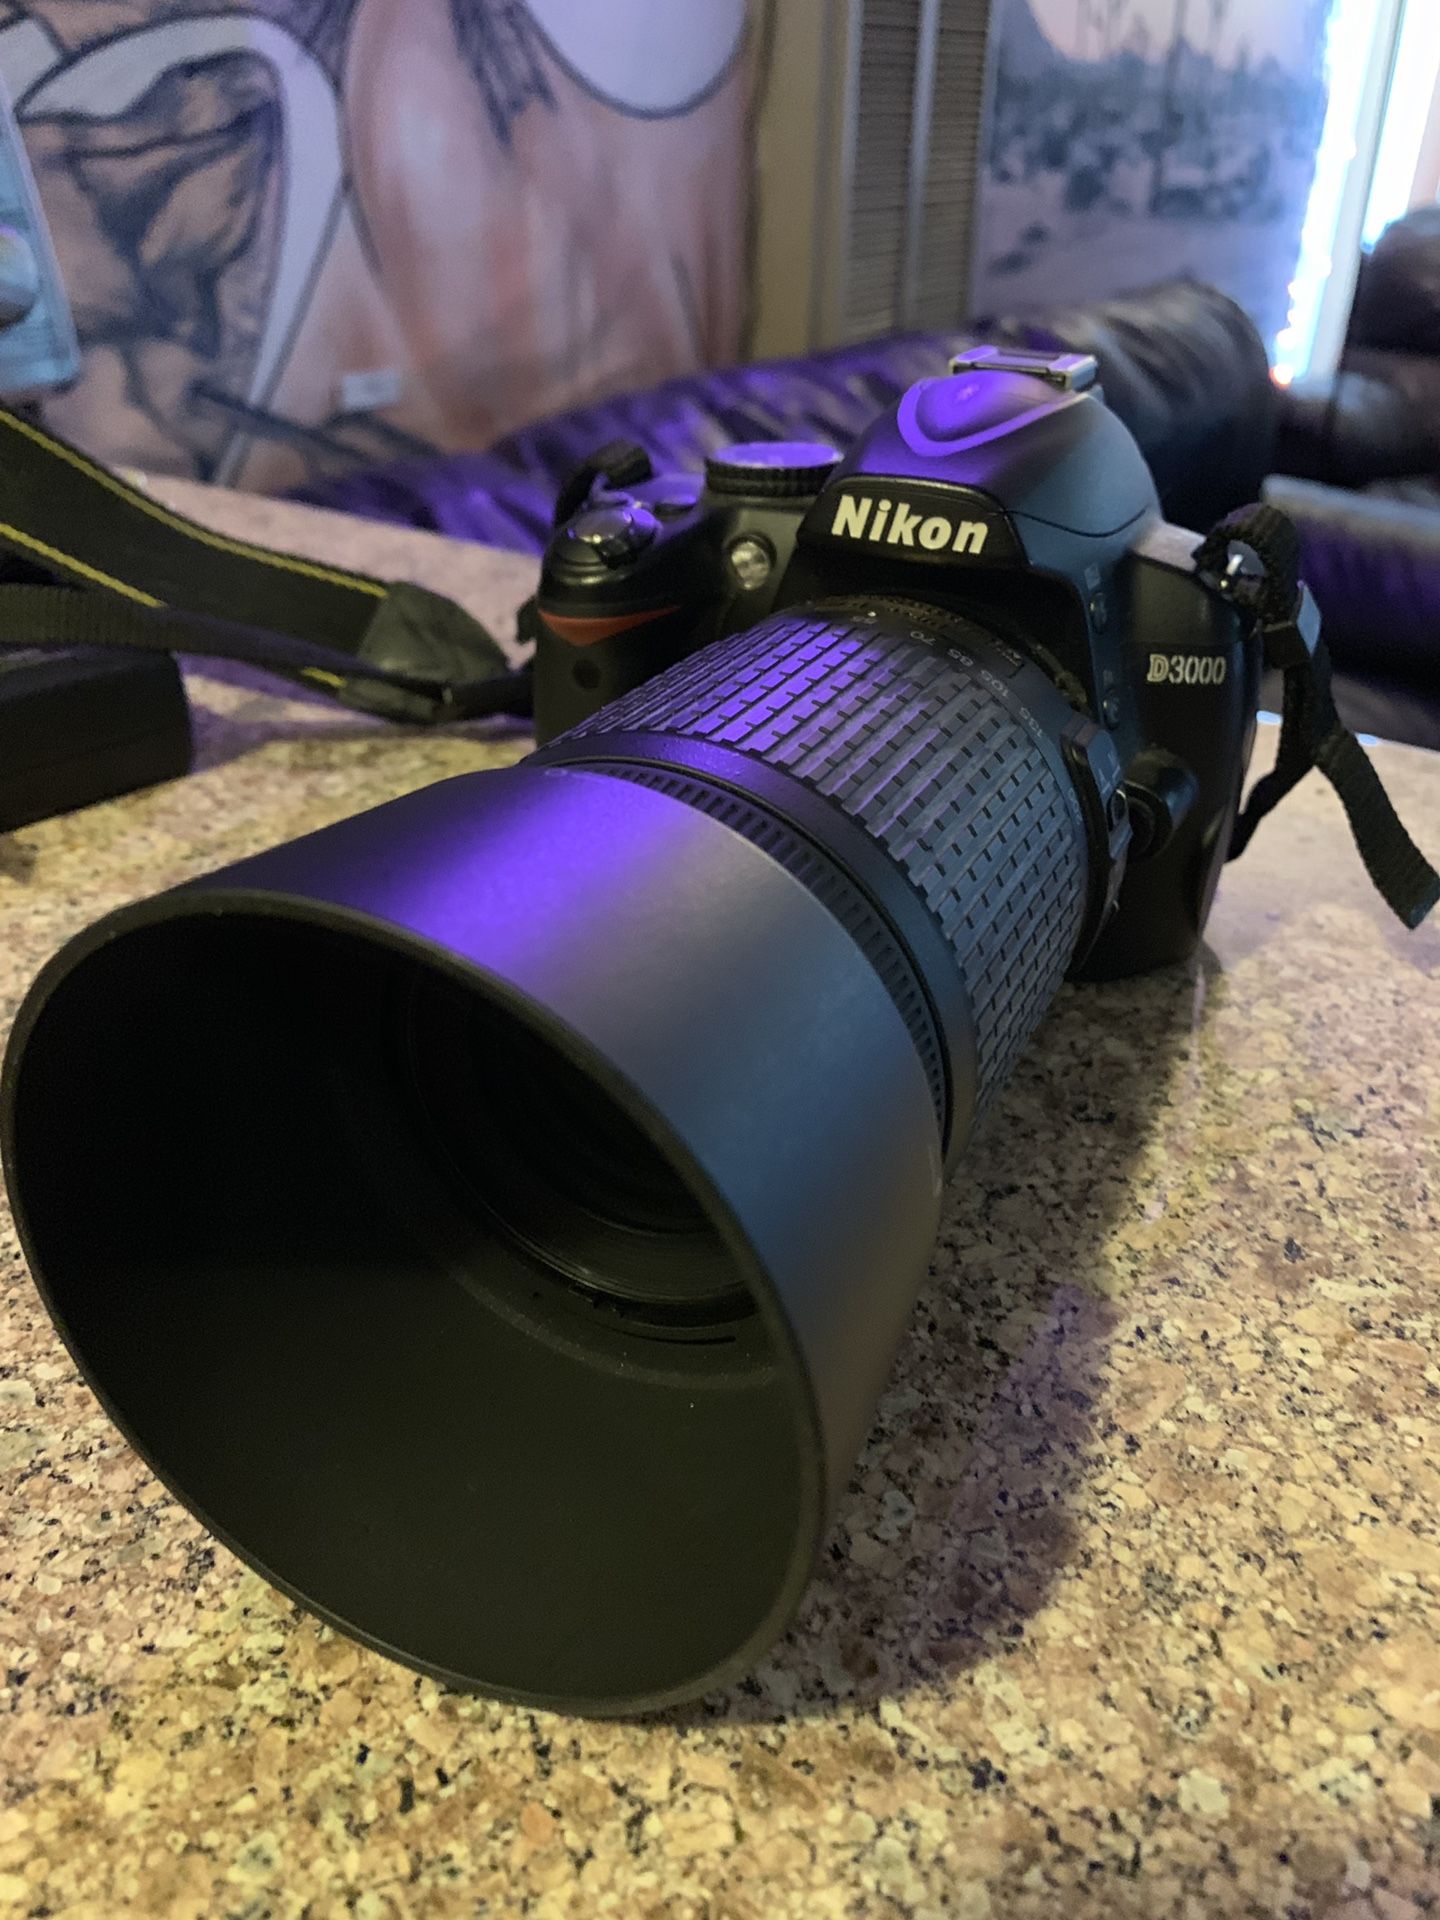 Nikon d3000 with two lenses and two chargers